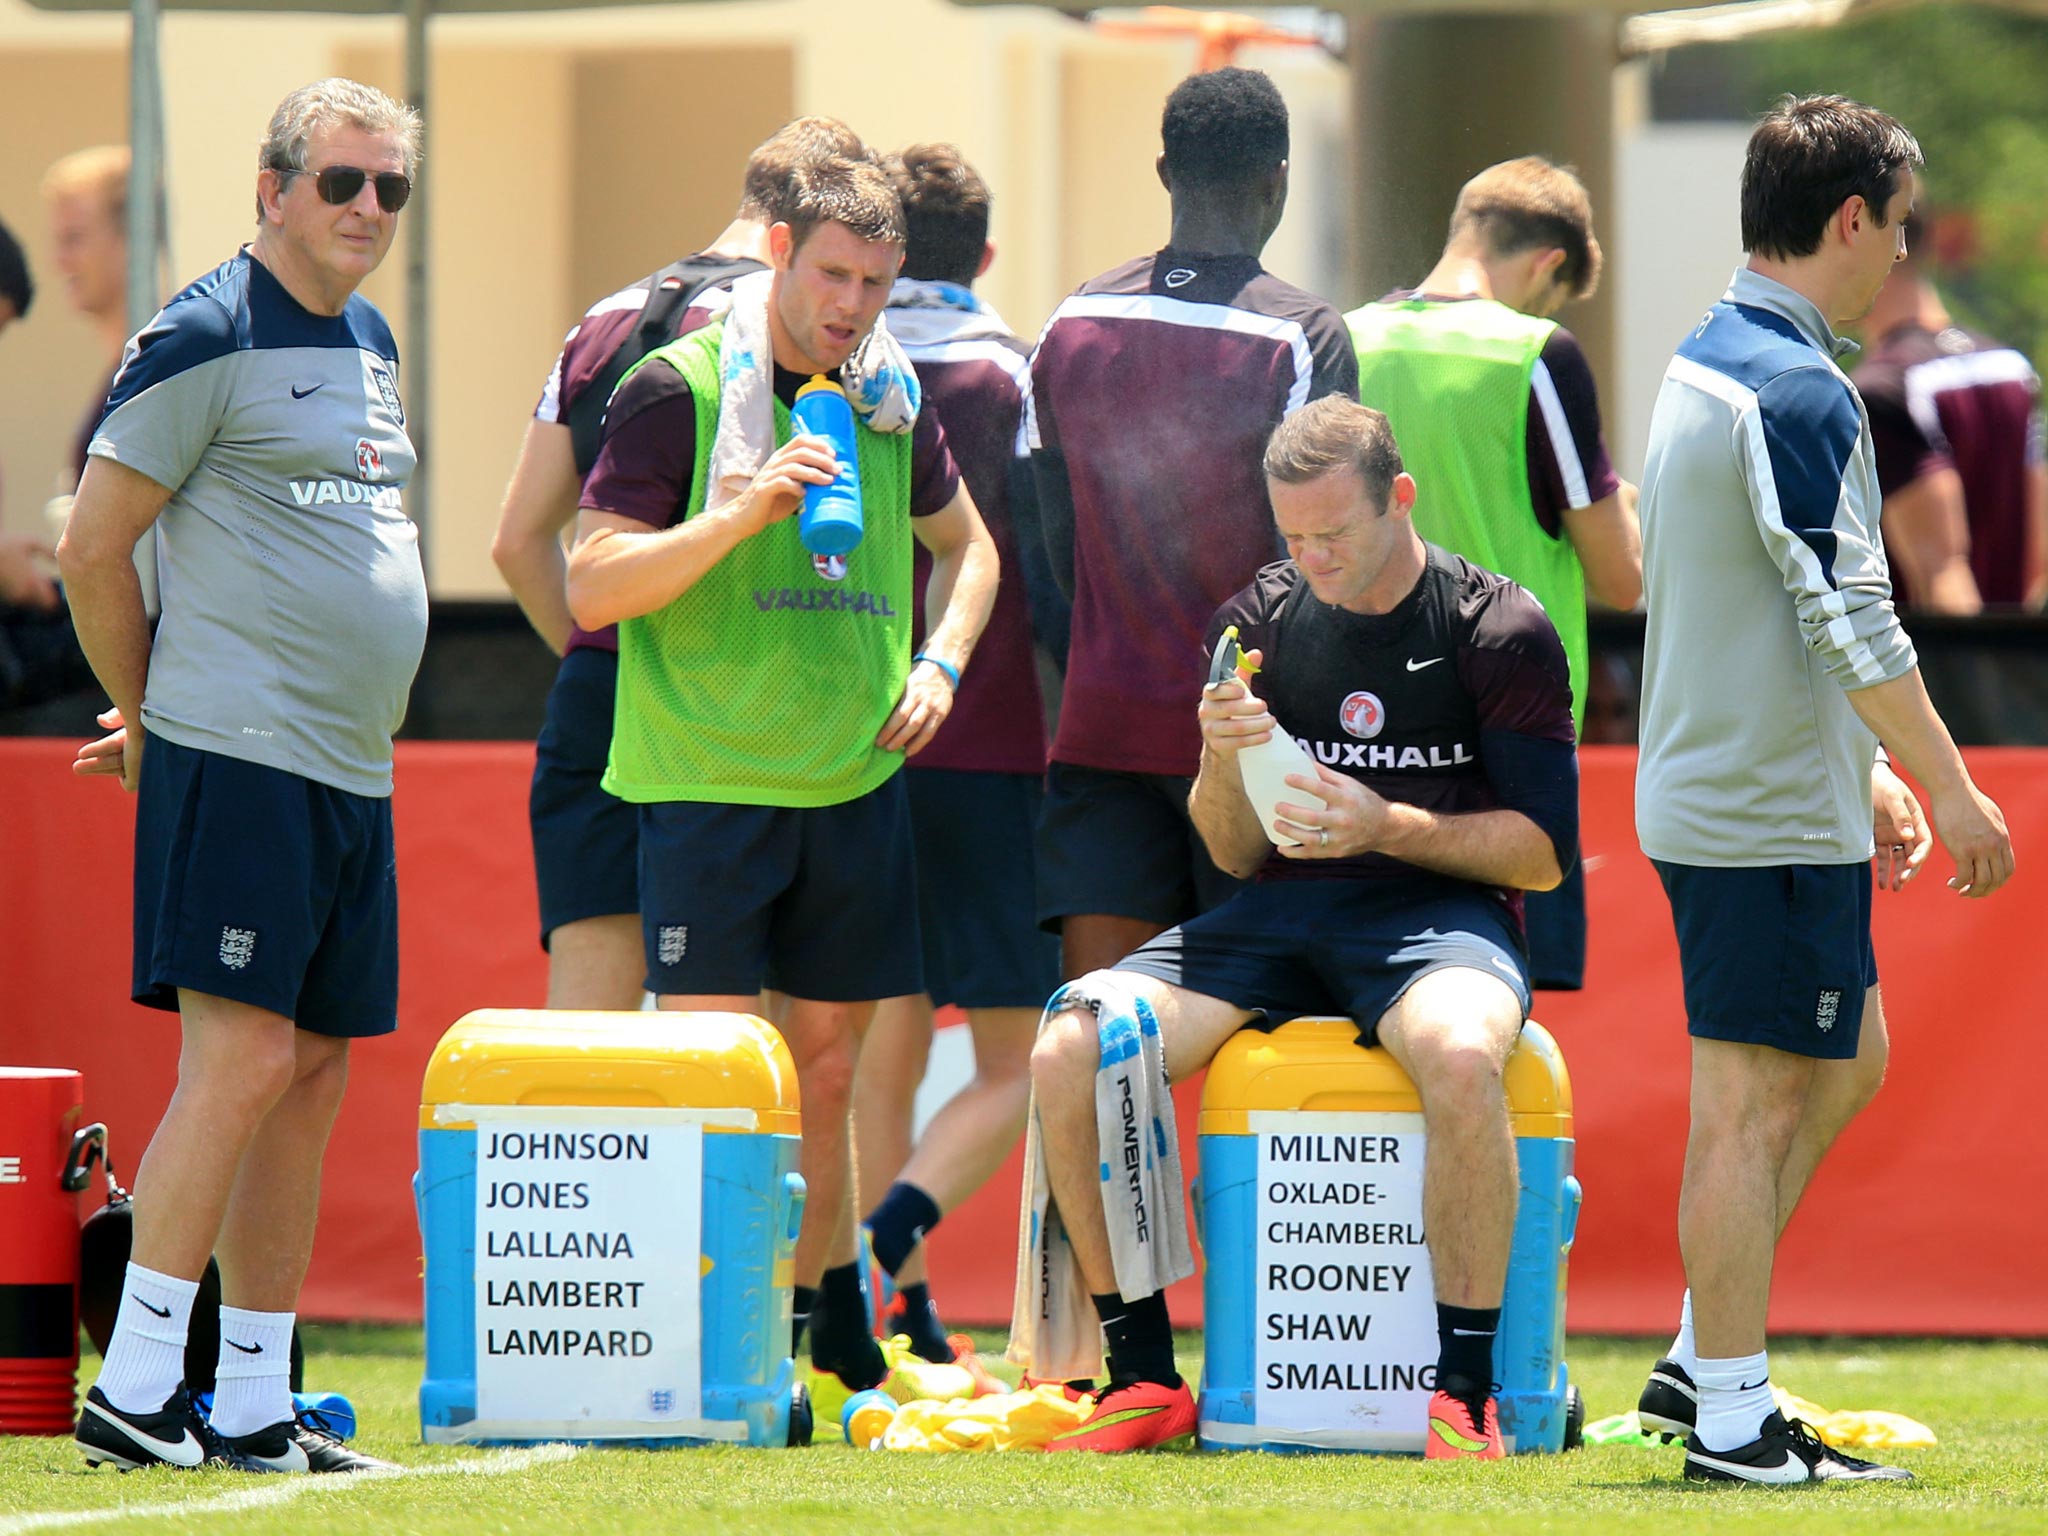 Wayne Rooney (right) and James Milner feel the heat as Roy Hodgson looks on during England training yesterday